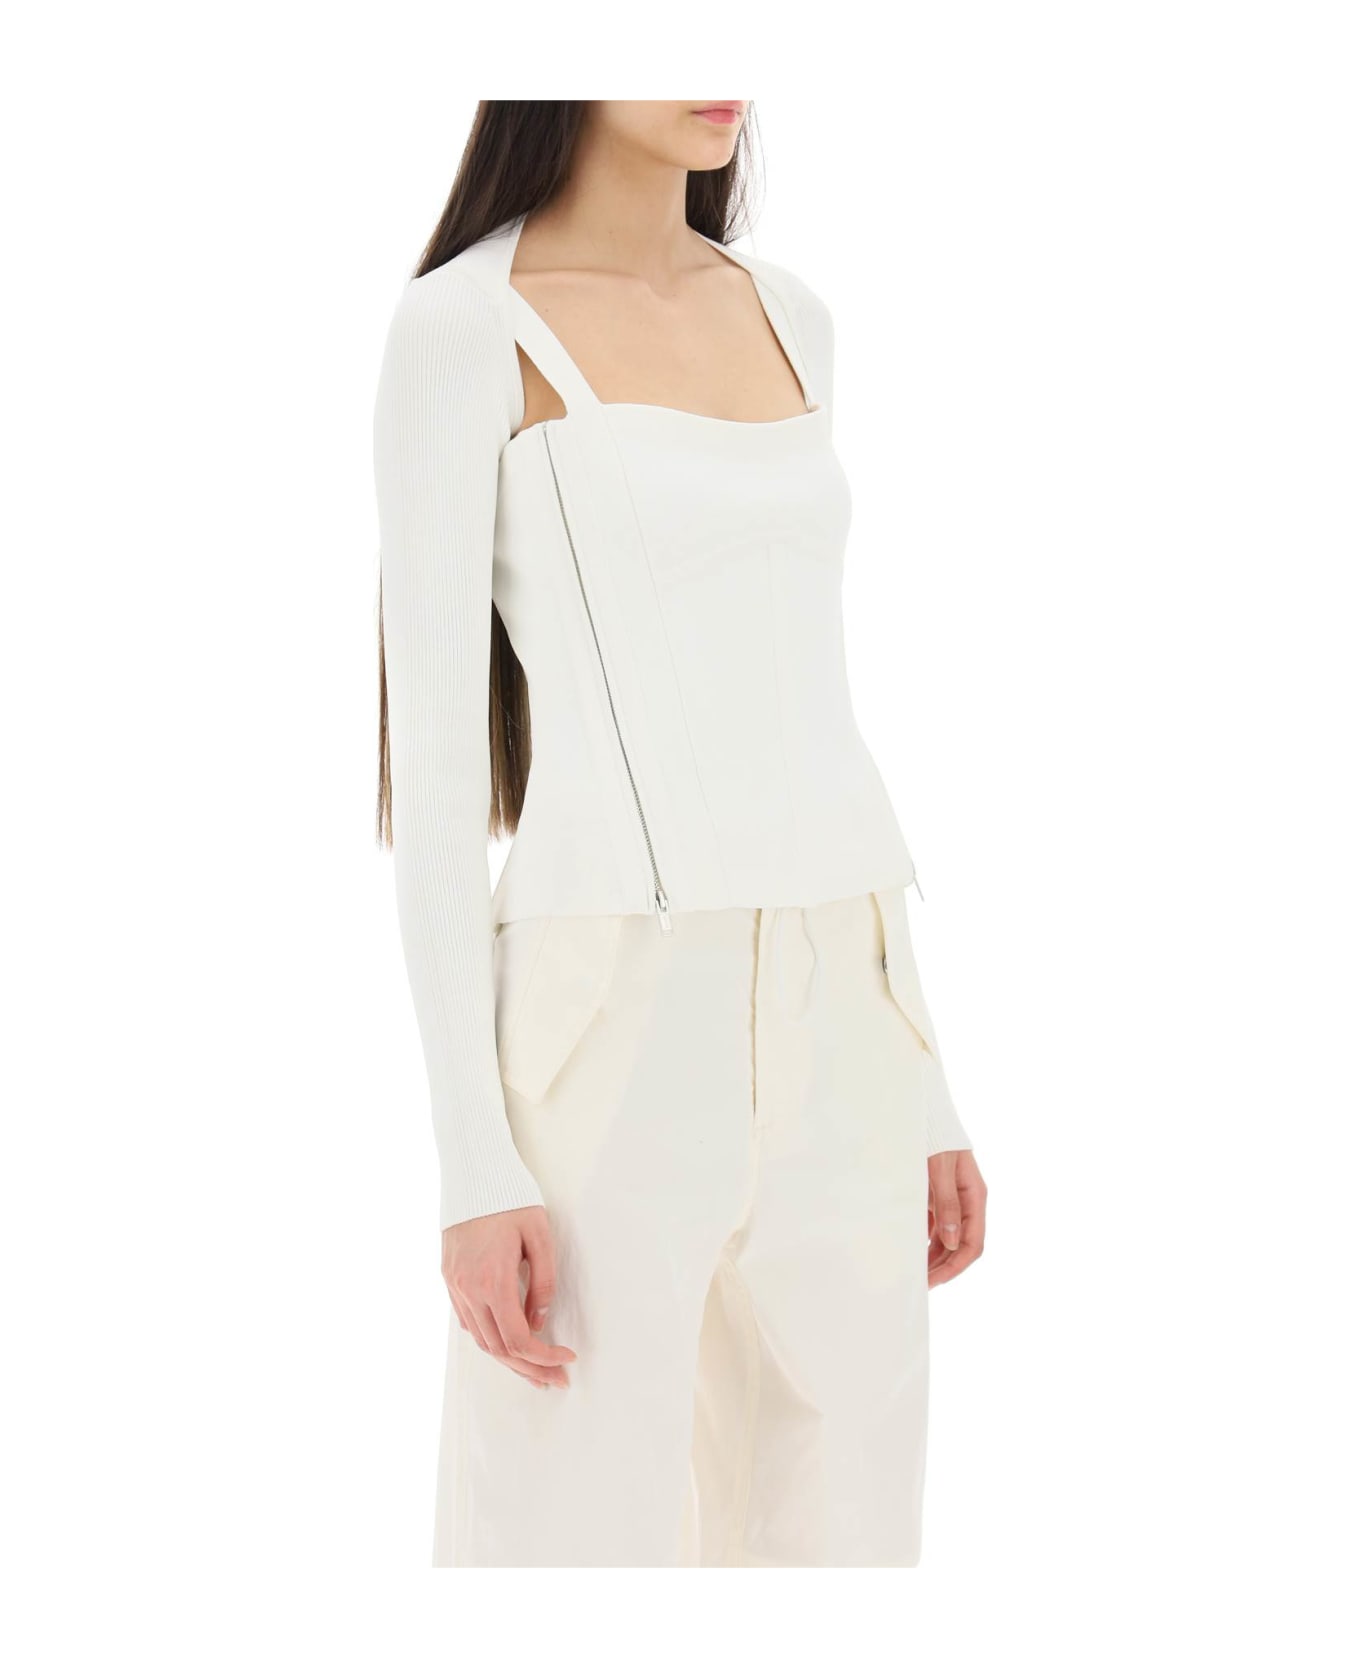 Dion Lee Modular Corset Top - IVORY (White) トップス